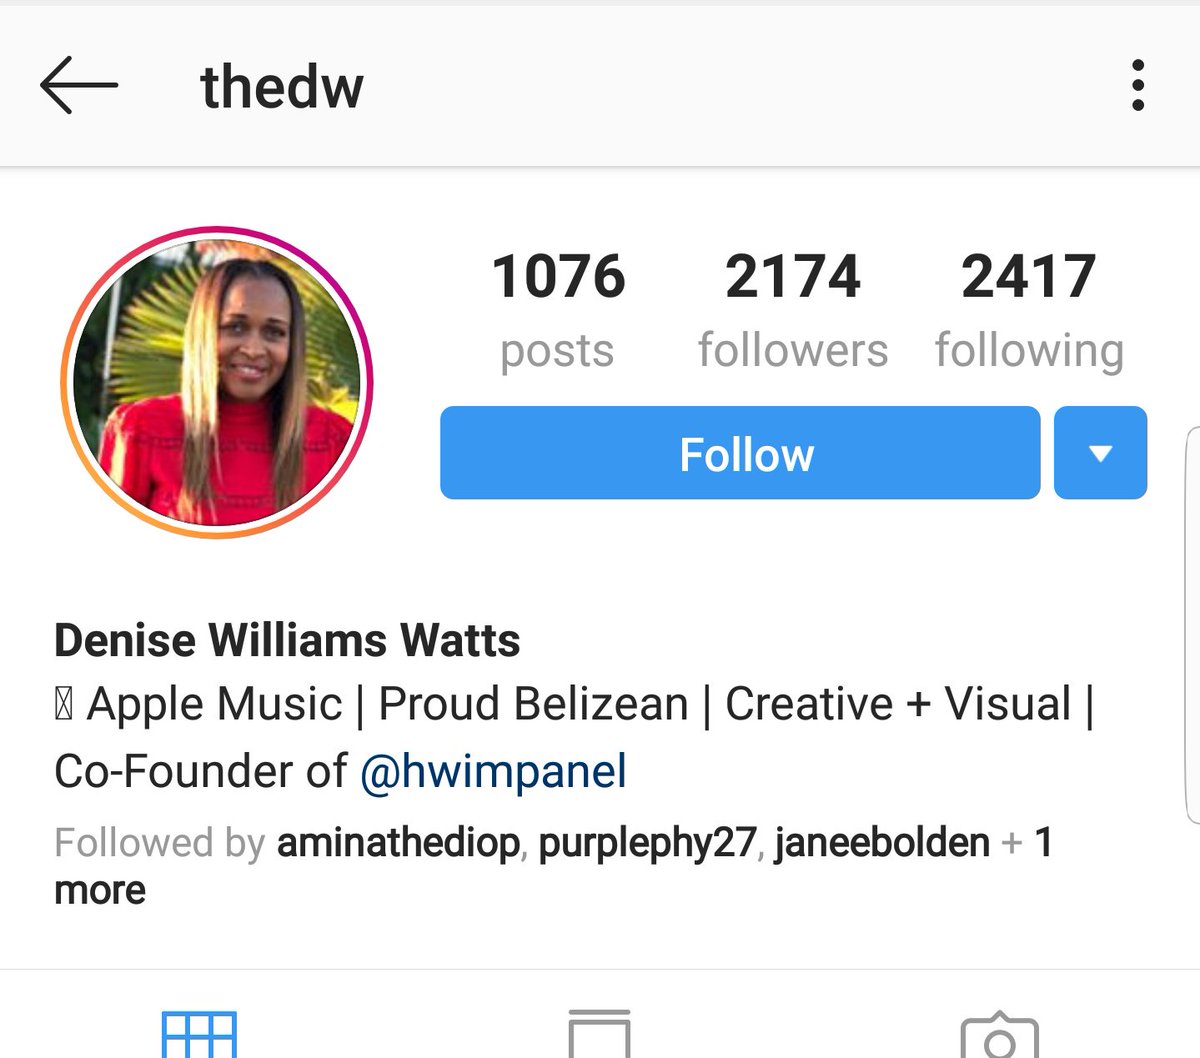 Denise Williams Watts IG: thedwGlobal Head Of Video Production, Content, & Live Events at Apple Music Co-founder of hwimpanel